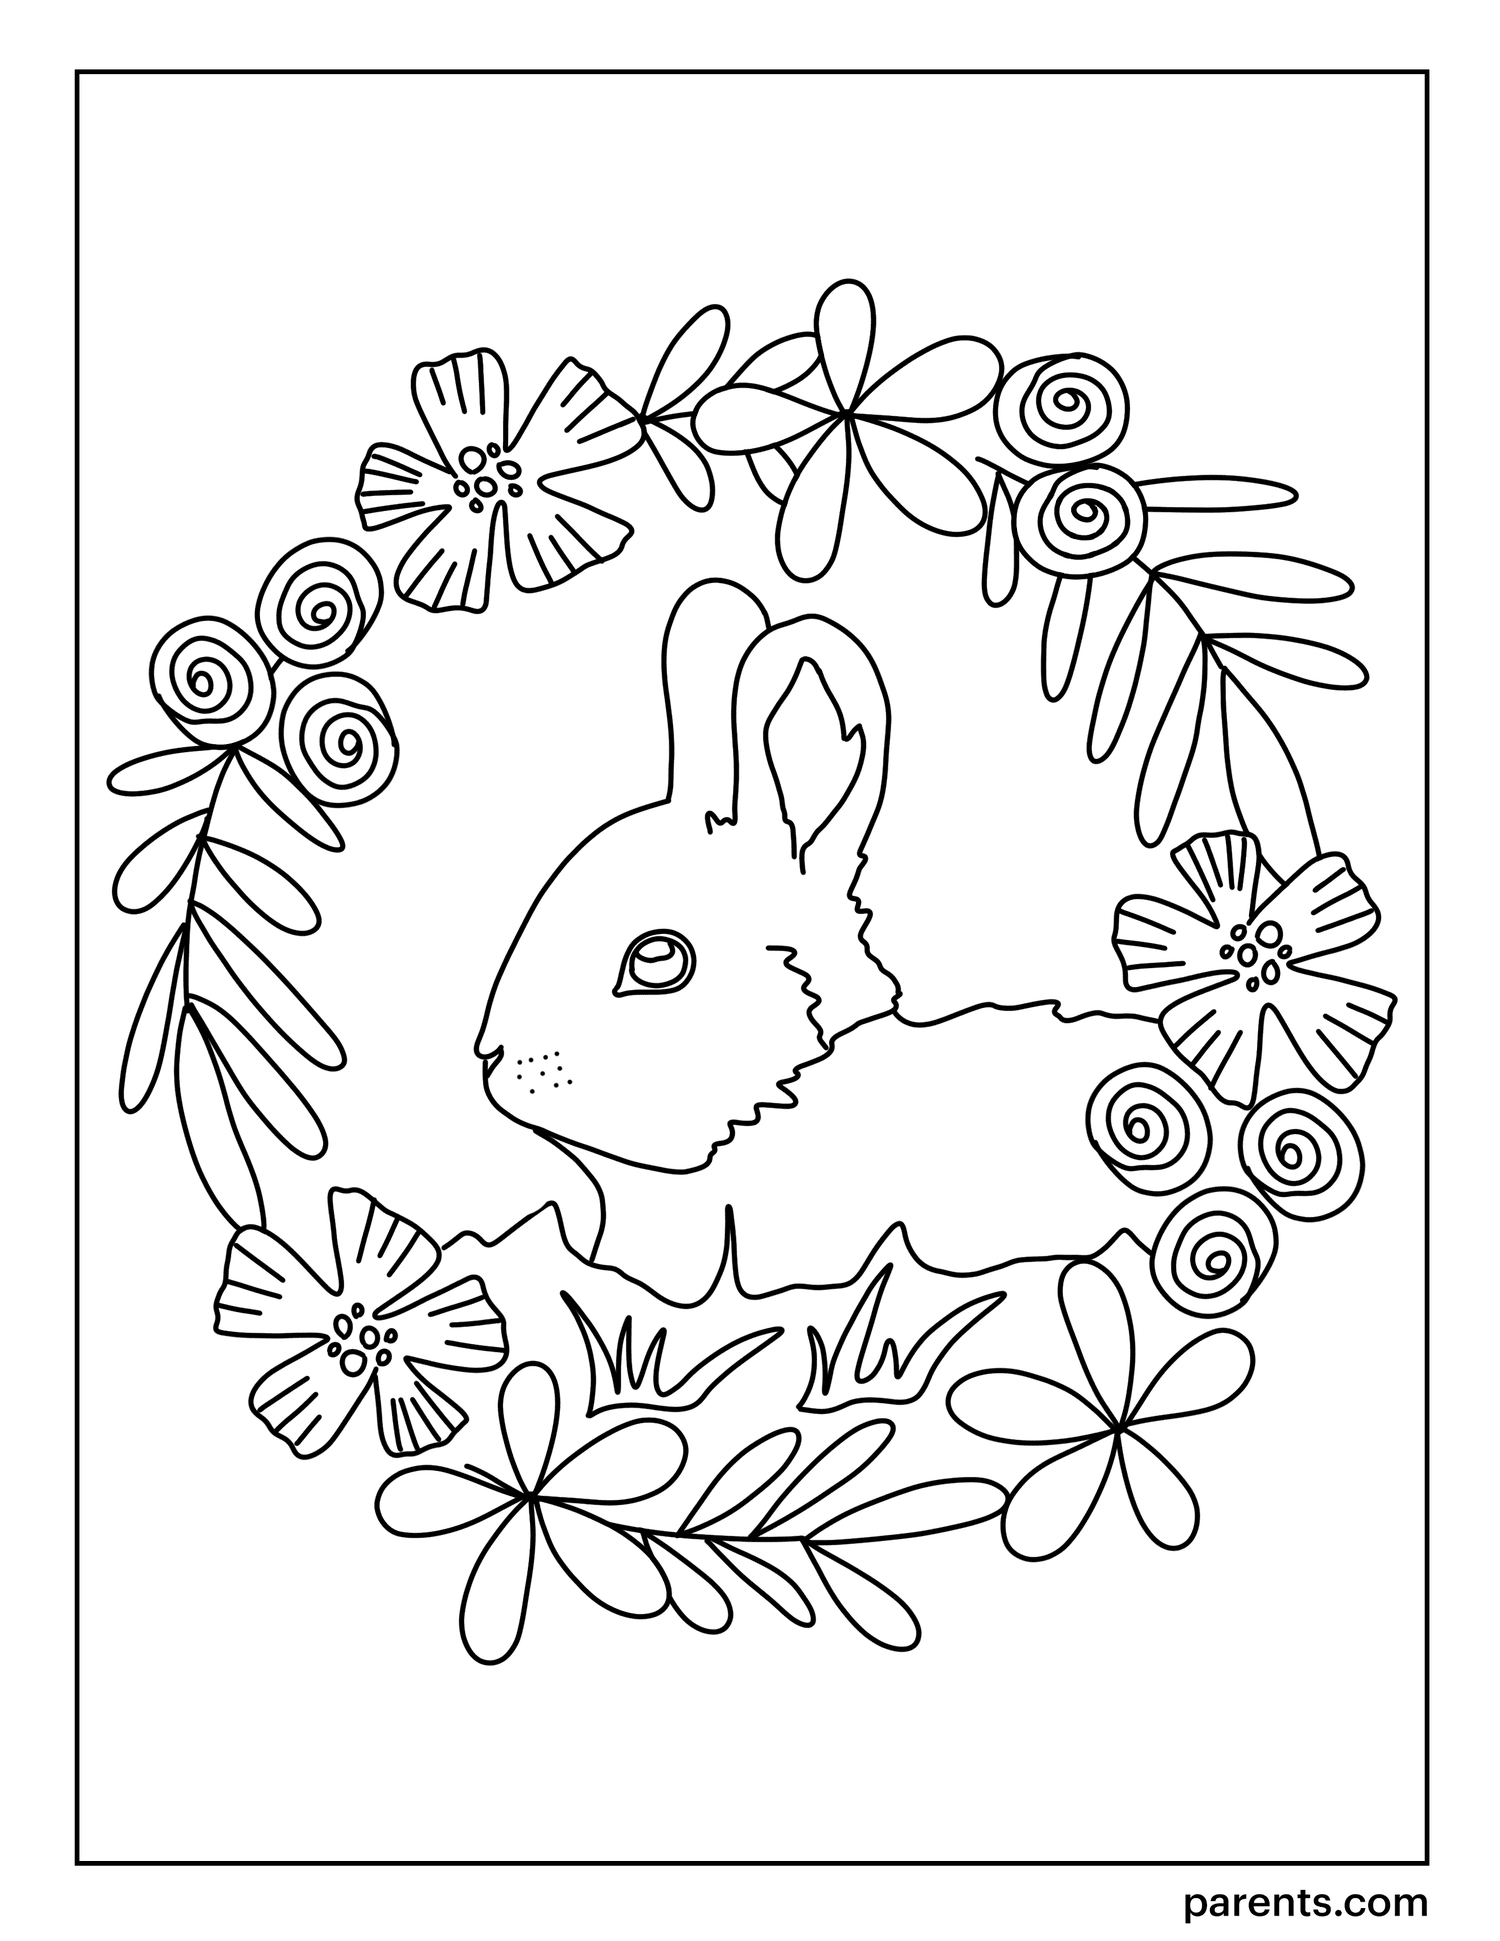 20 Free Easter Coloring Pages for Kids   Parents